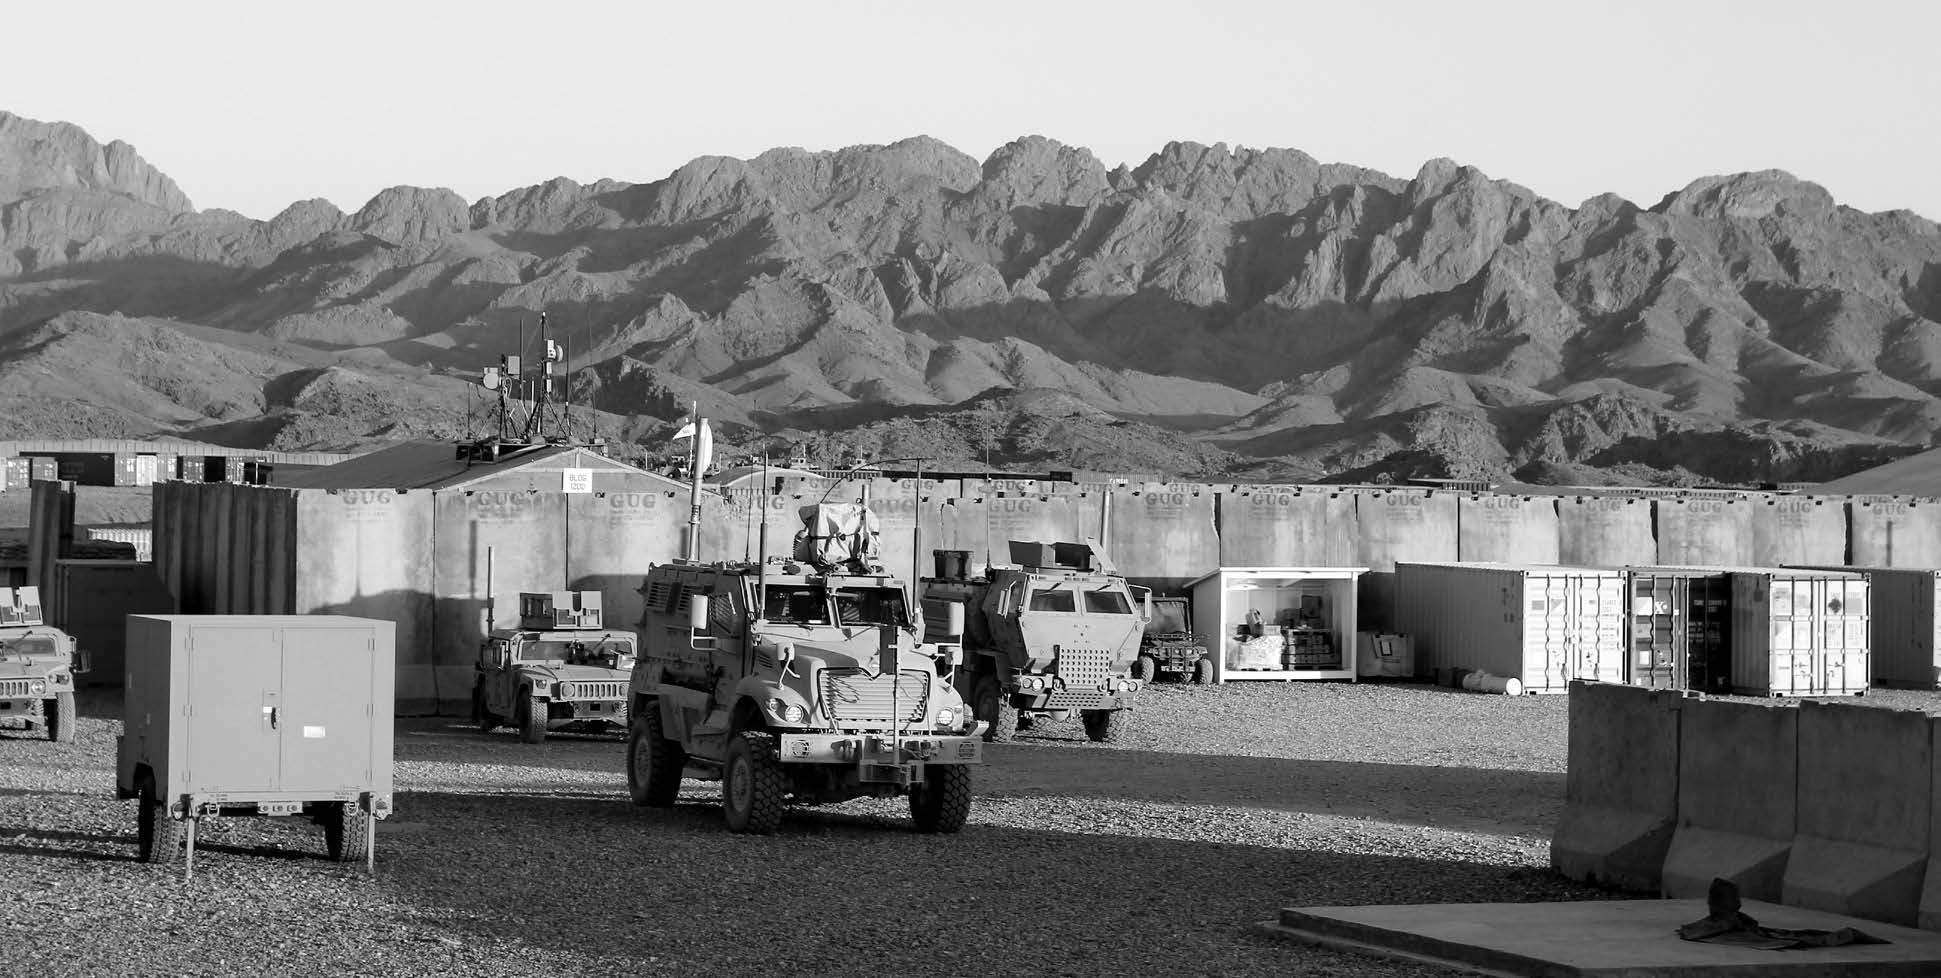 A typical scene at camps and forward operating bases in Afghanistan. Courtesy of J. Joseph DuWors.